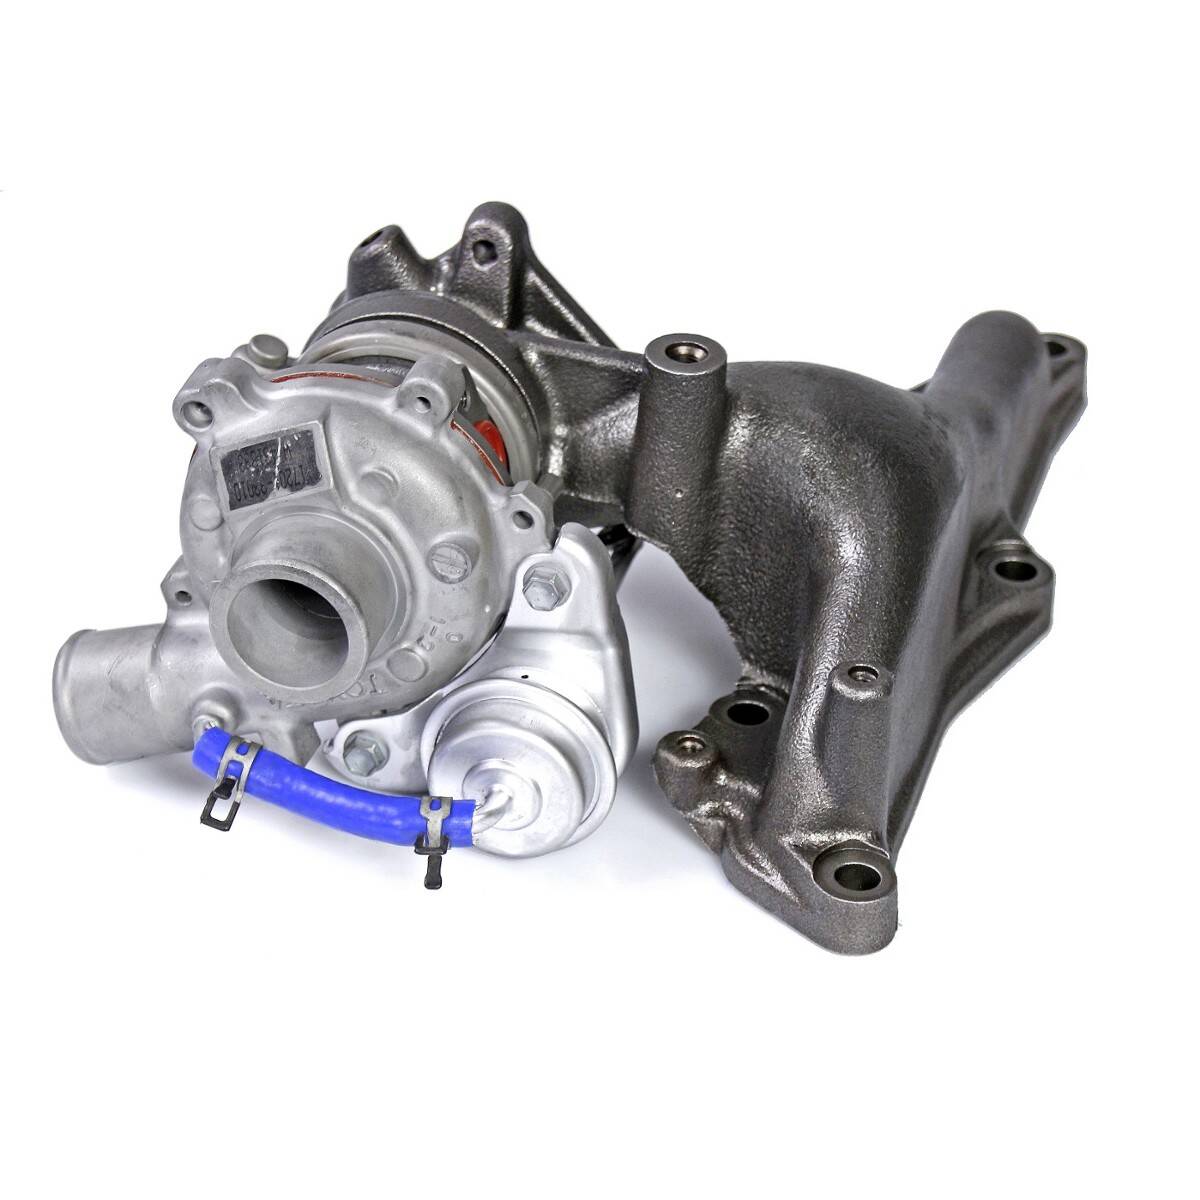 TURBOCHARGER TURBO REMANUFACTURED 17201-33010 17201-33010